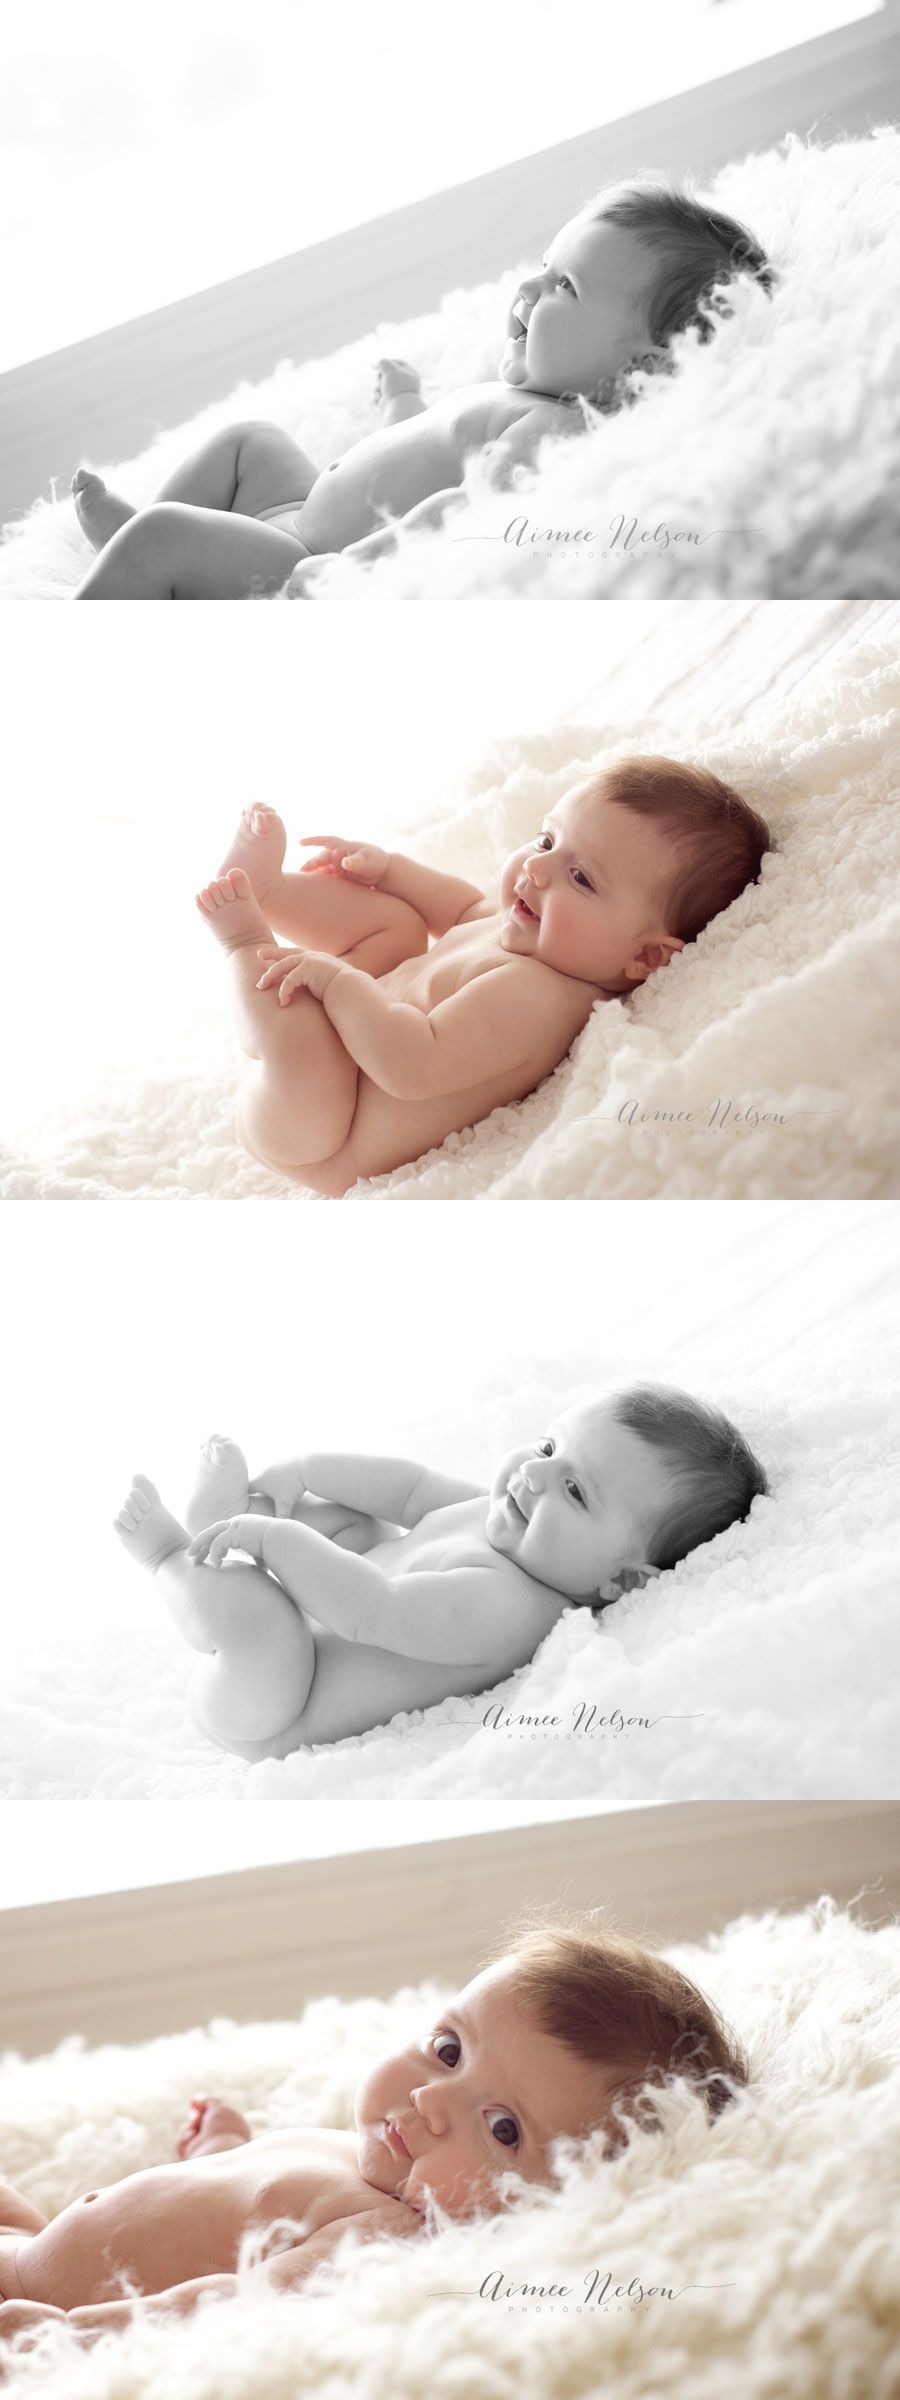 Aimee Nelson Photography  Beautiful Newborn Photography 3 month olds